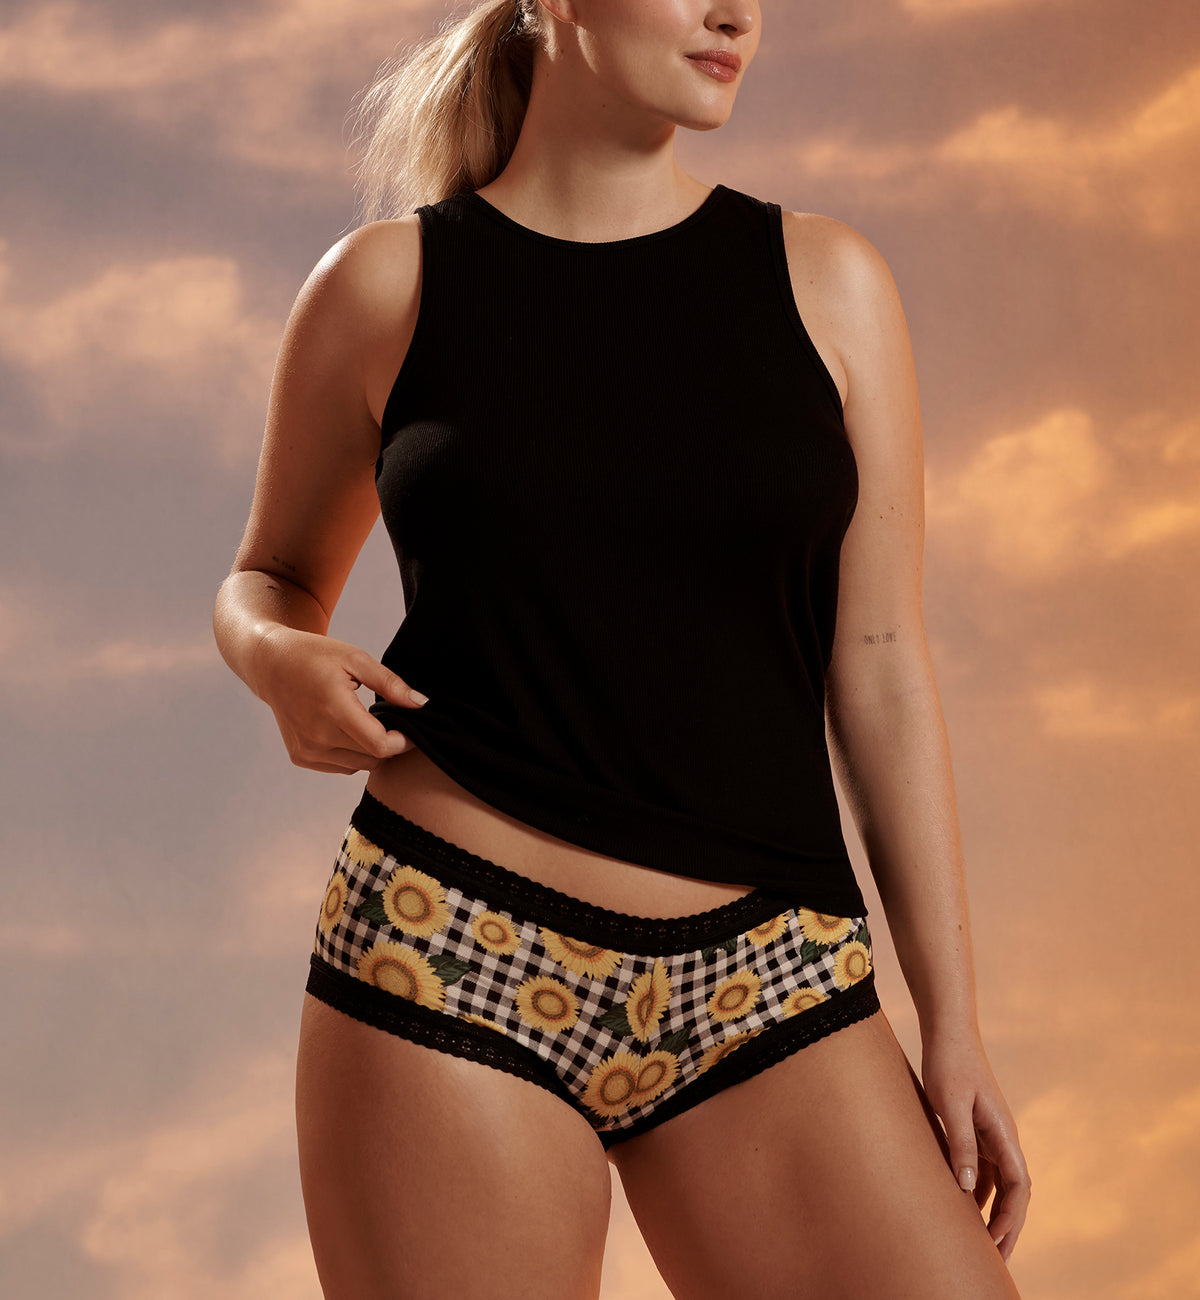 Hanky Panky DreamEase Printed Boyshort (PR681274),Small,Fields of Gold - Fields of Gold,Small